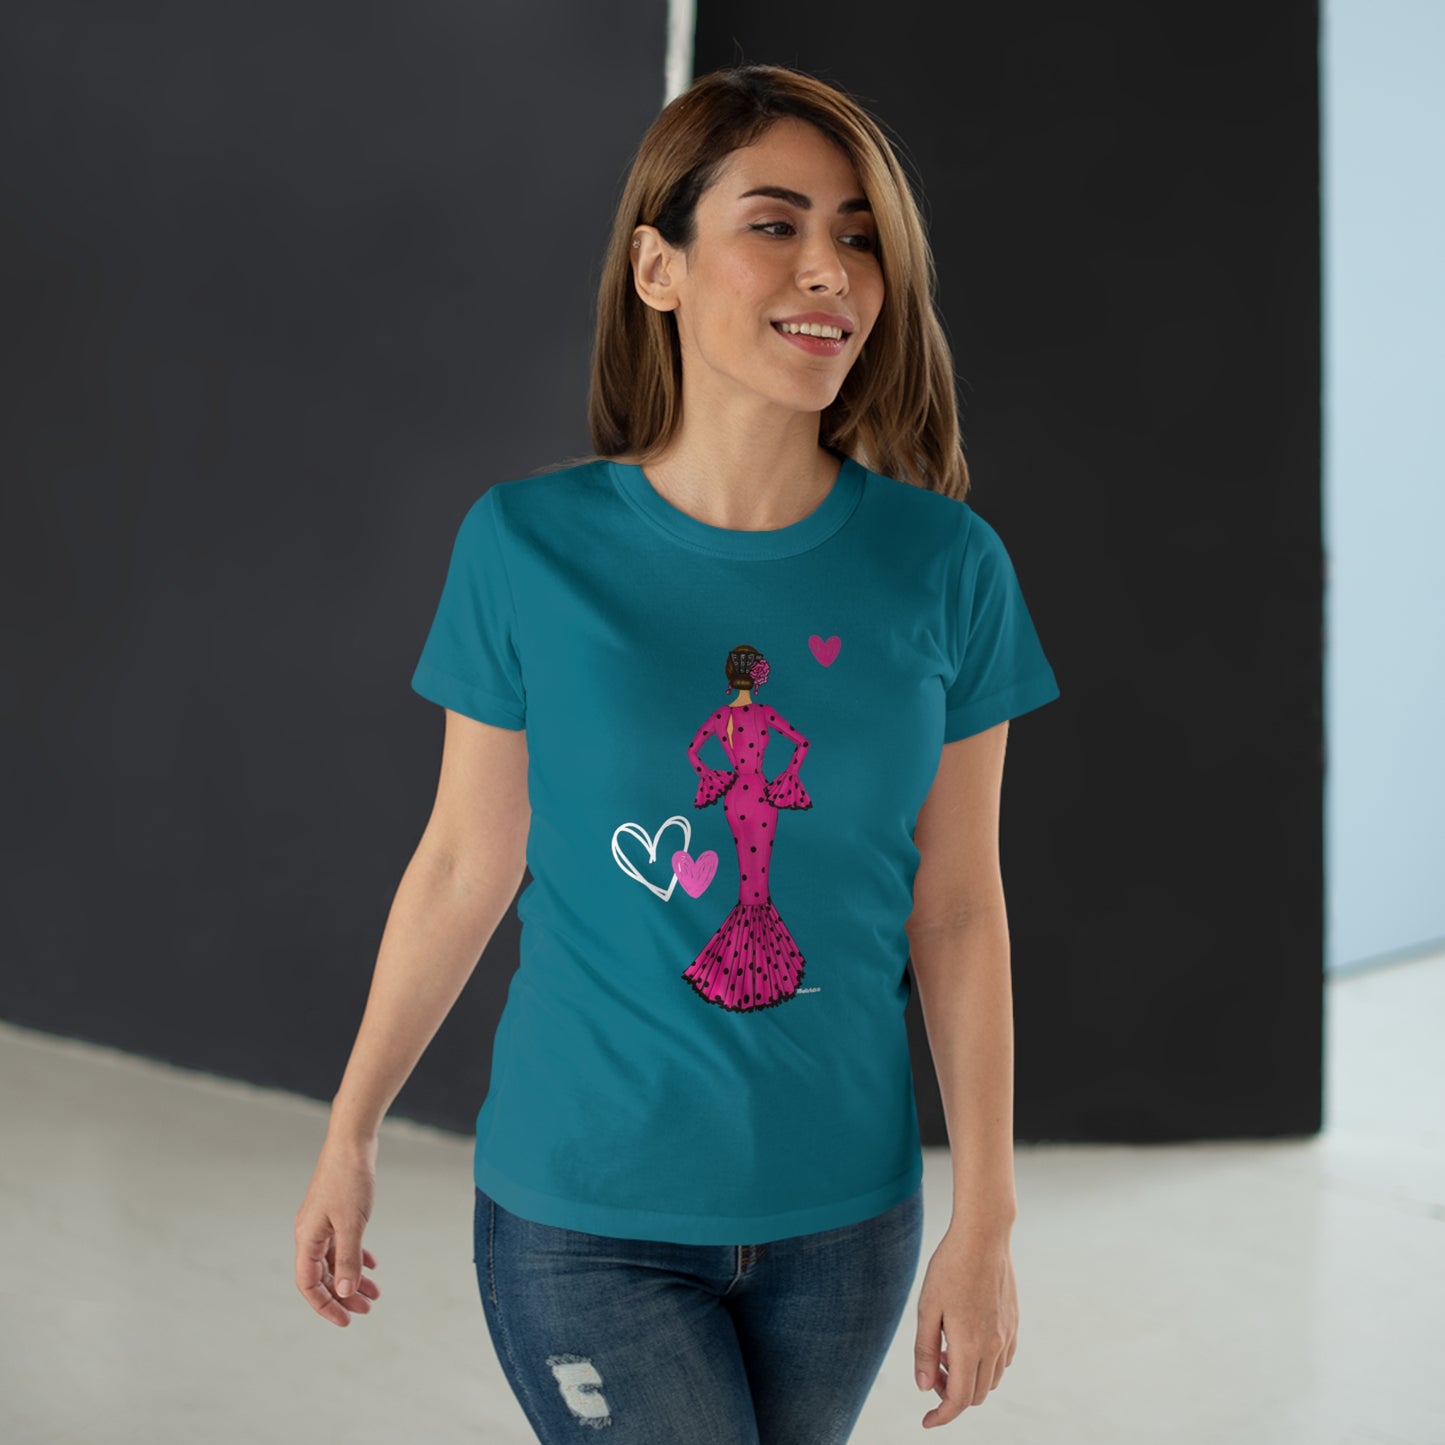 a woman wearing a t - shirt with a pink princess on it